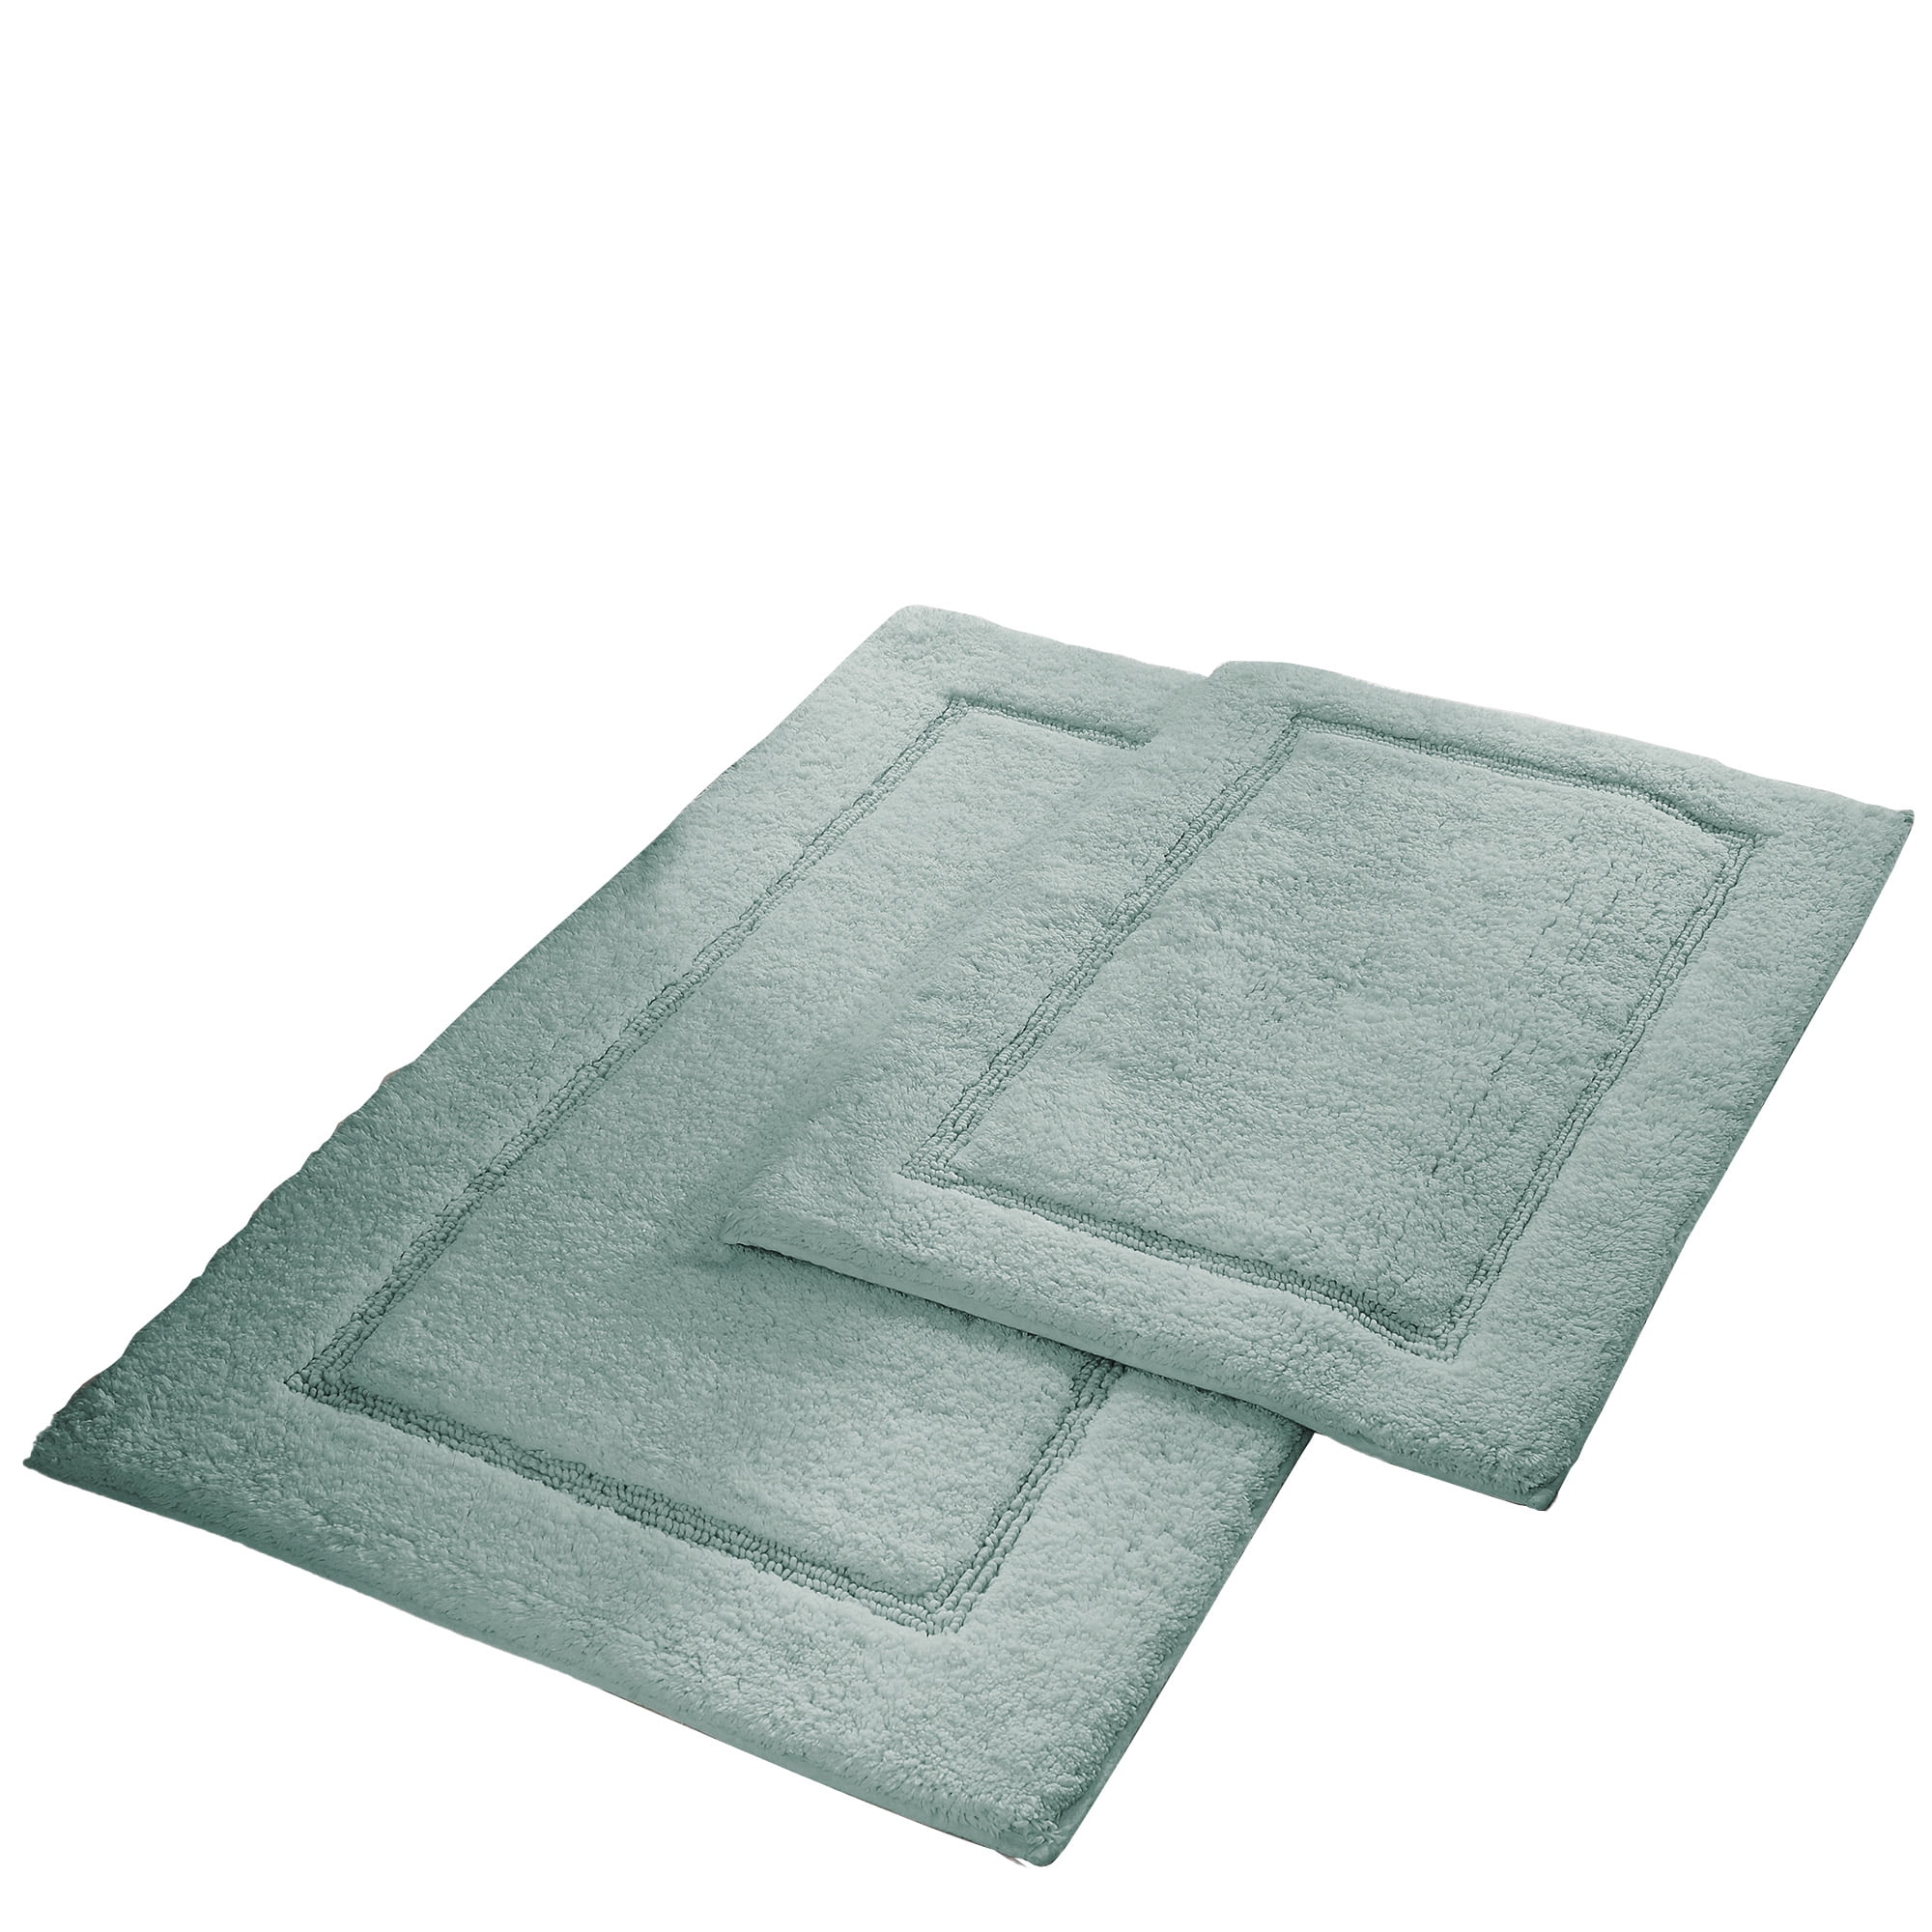  TEXTILOM Luxury 2 Pack Banded Cotton Bath Mats for